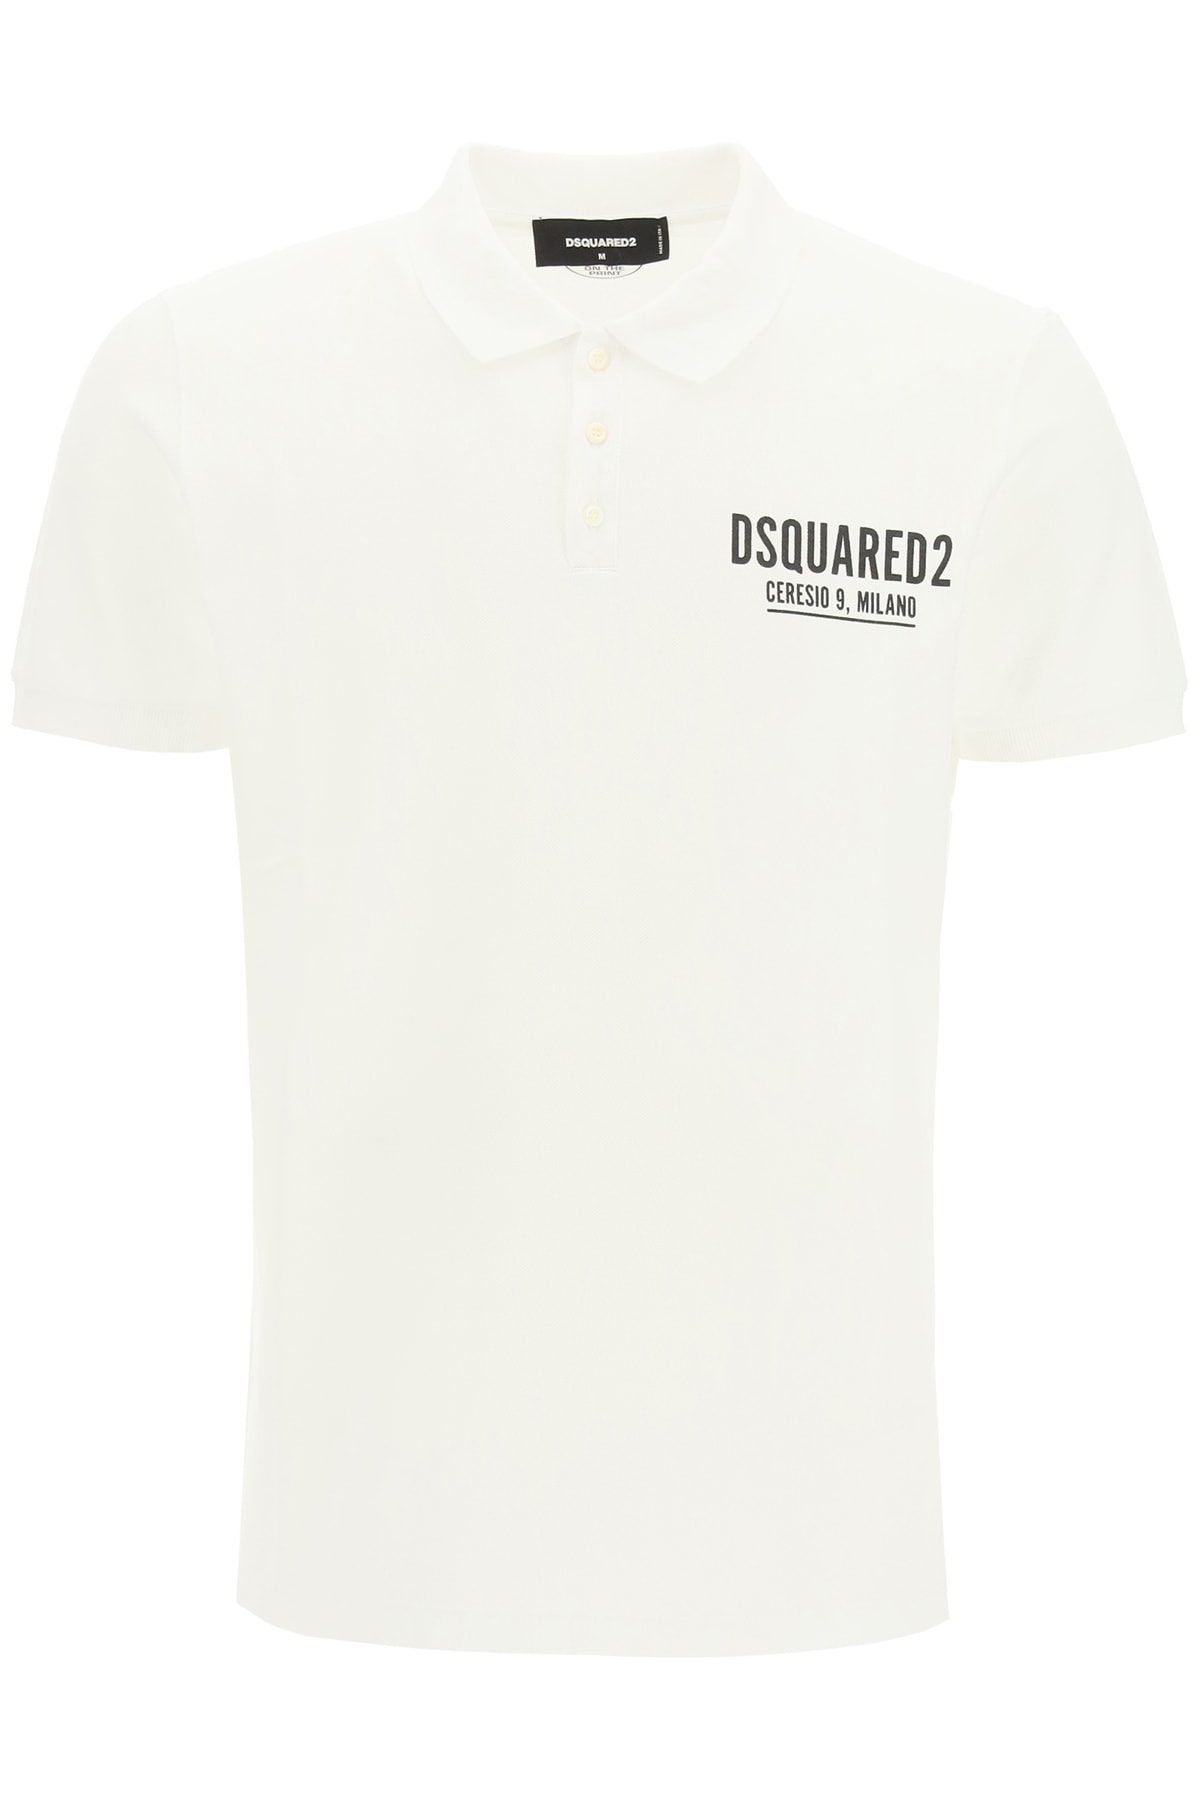 Dsquared2 Polo Shirt With ceresio 9 Print